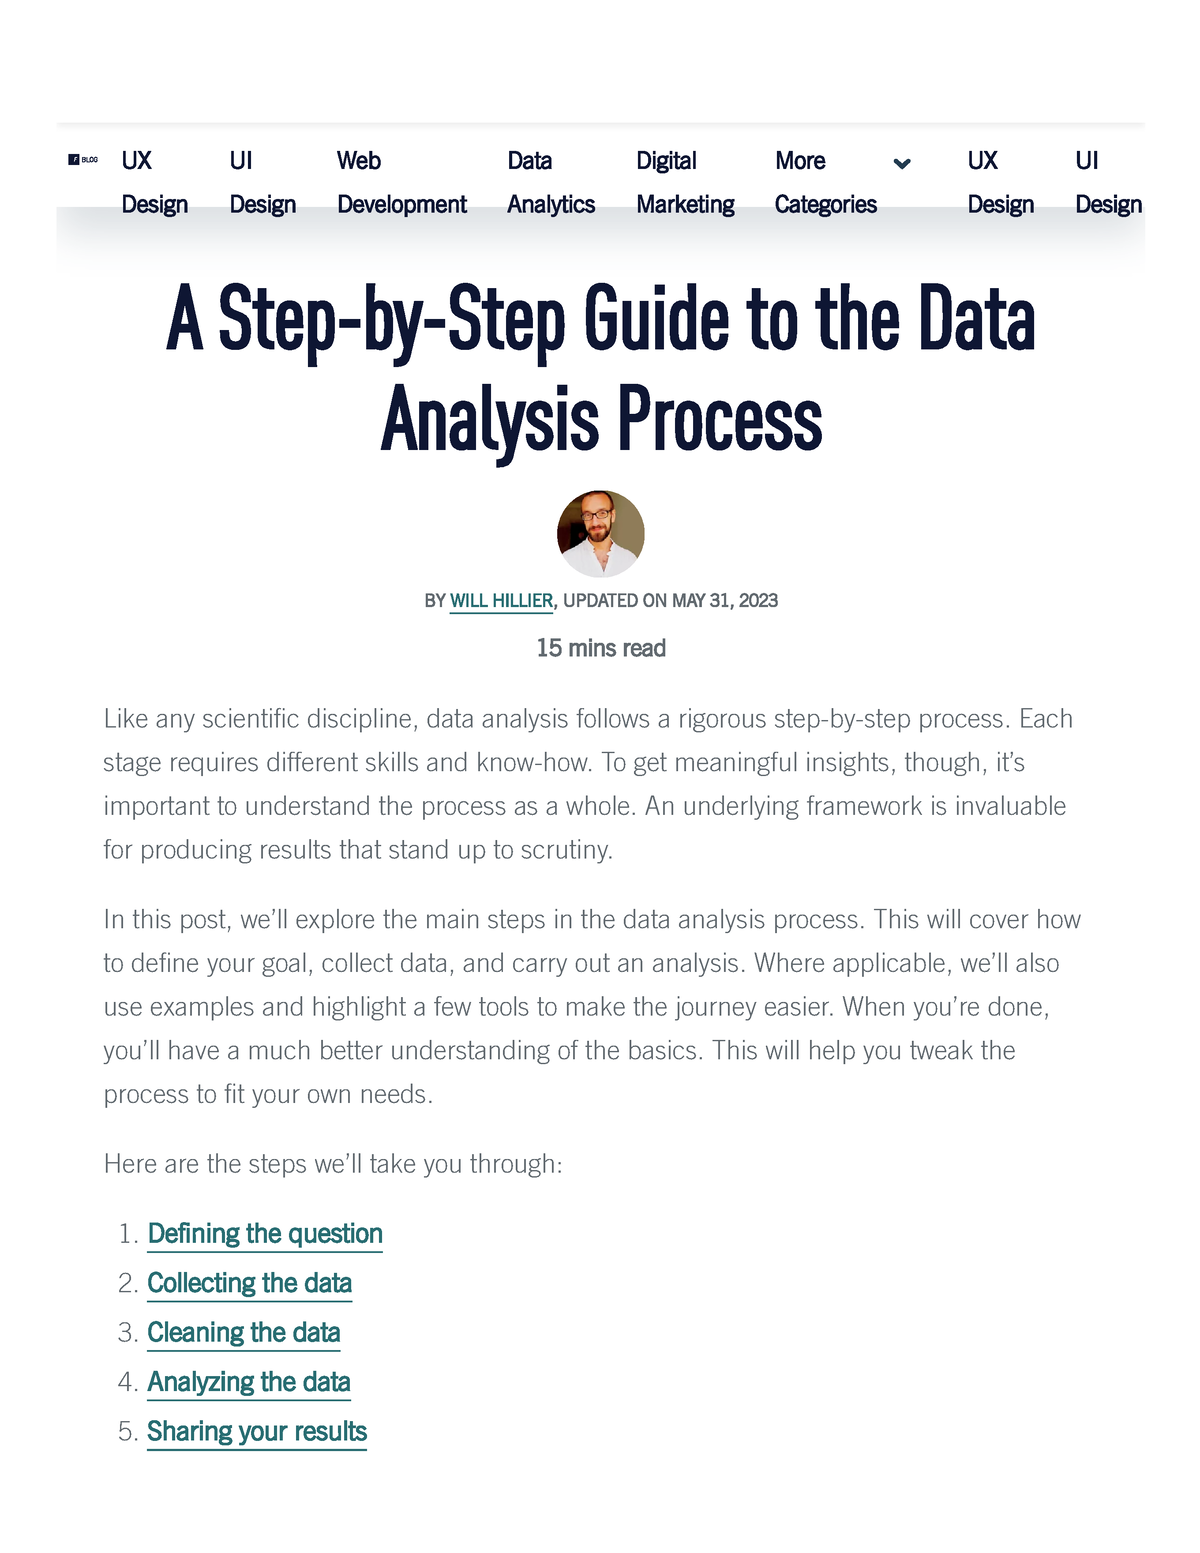 How to Analyze Data - A Step by Step Guide 